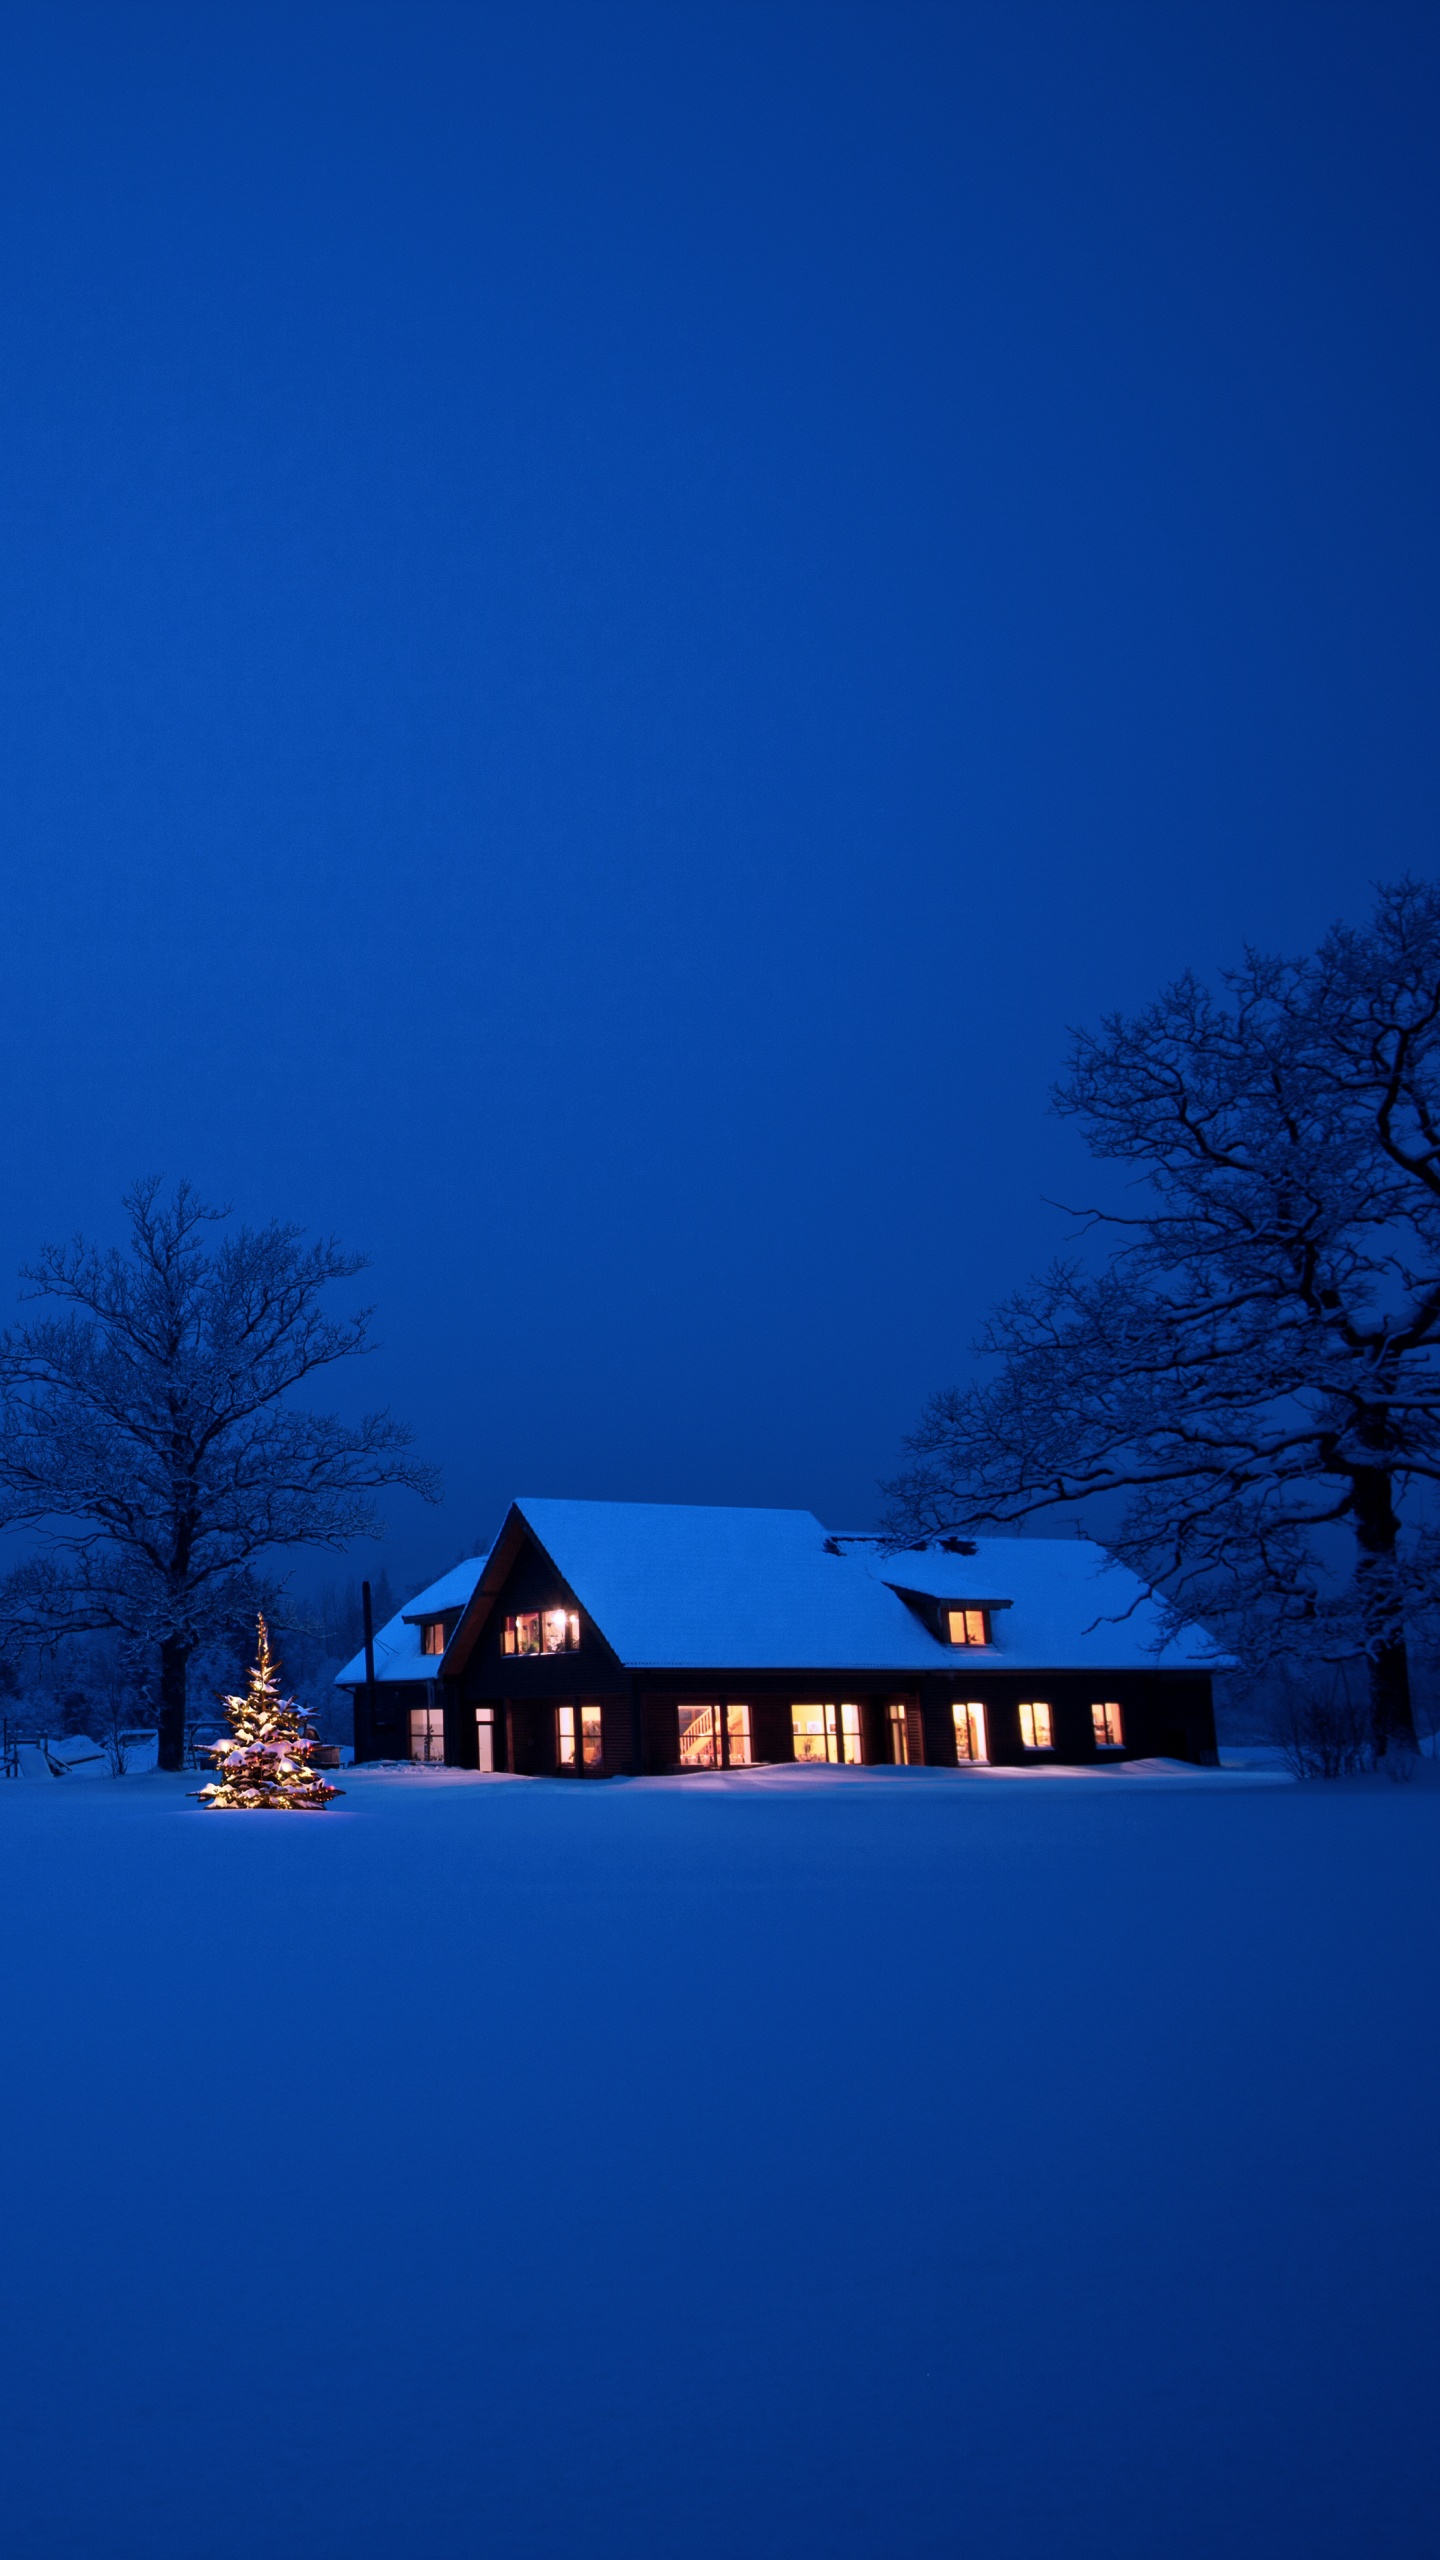 Brown Wooden House on Snow Covered Ground During Night Time. Wallpaper in 1440x2560 Resolution